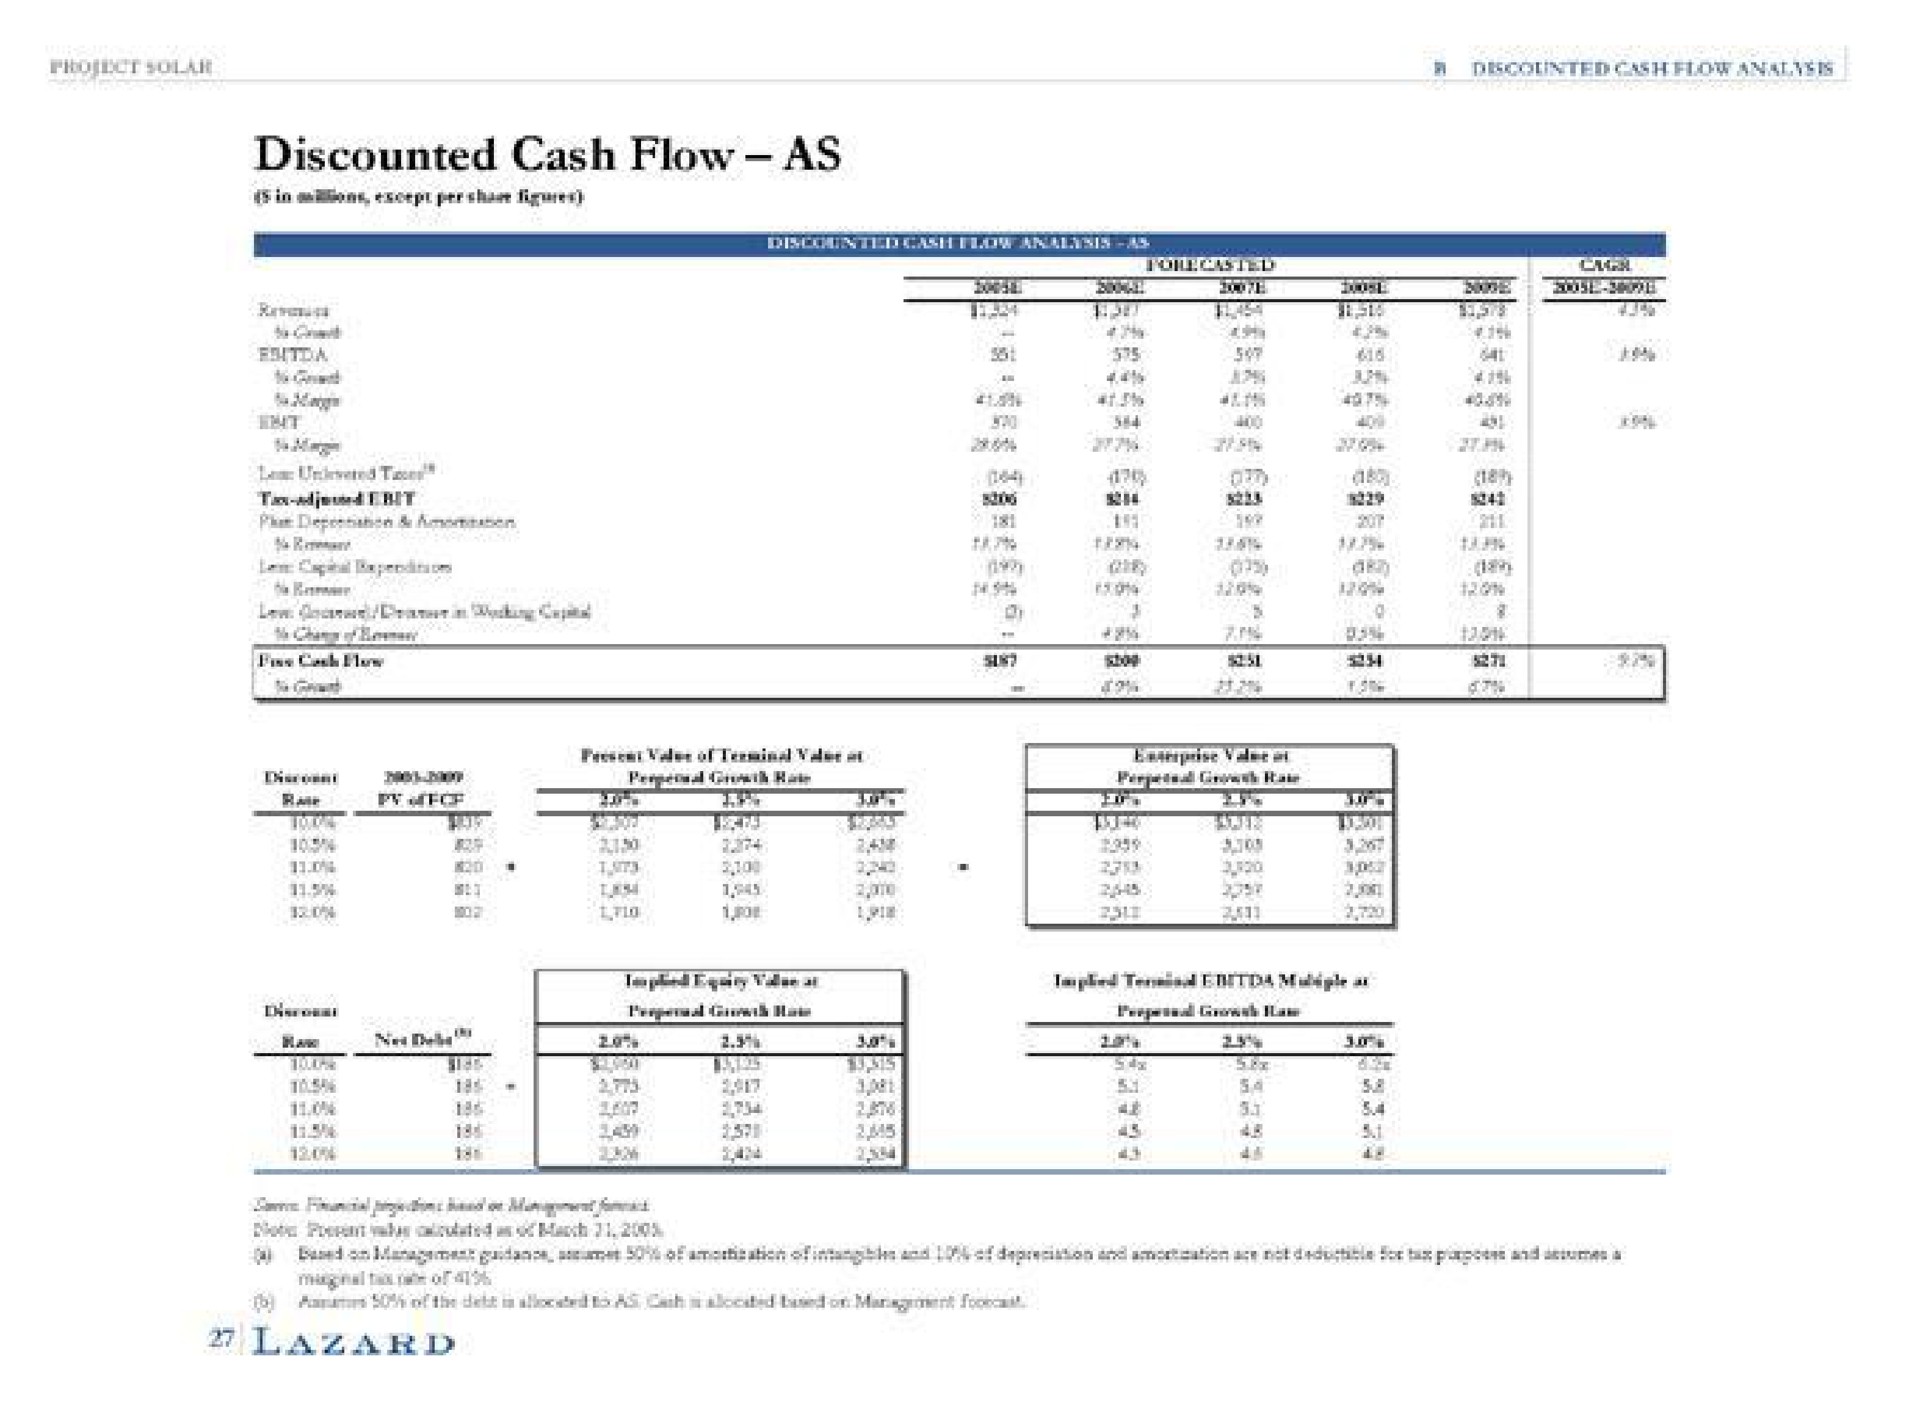 discounted cash flow as | Lazard